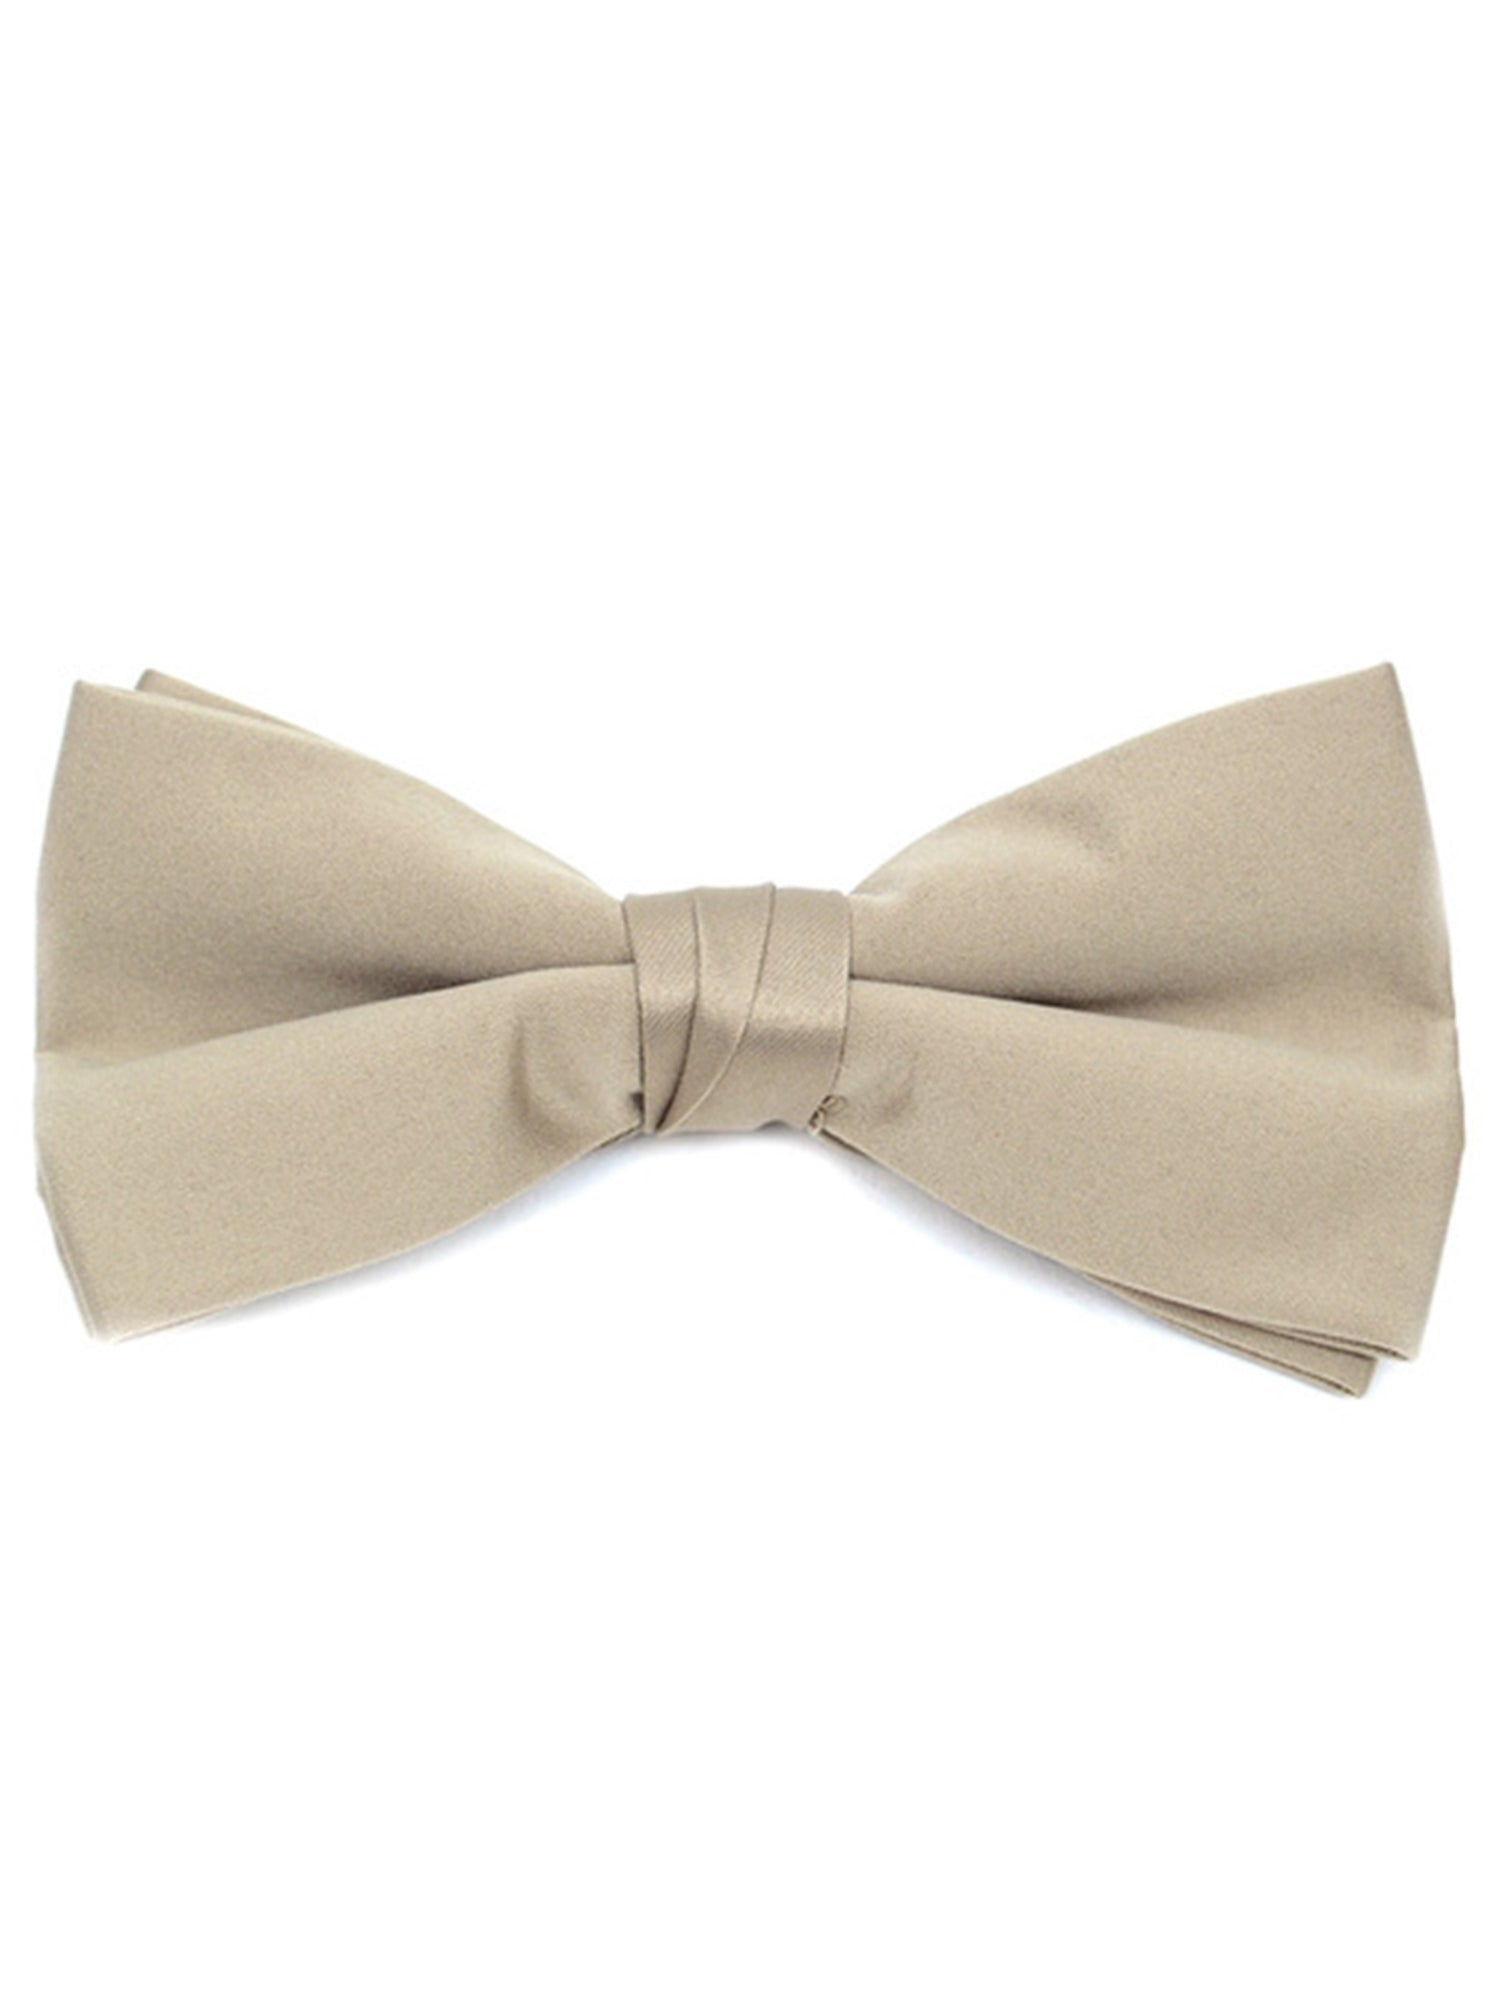 Young Boy's Pre-tied Clip On Bow Tie - Formal Tuxedo Solid Color Boy's Solid Color Bow Tie TheDapperTie Taupe One Size 